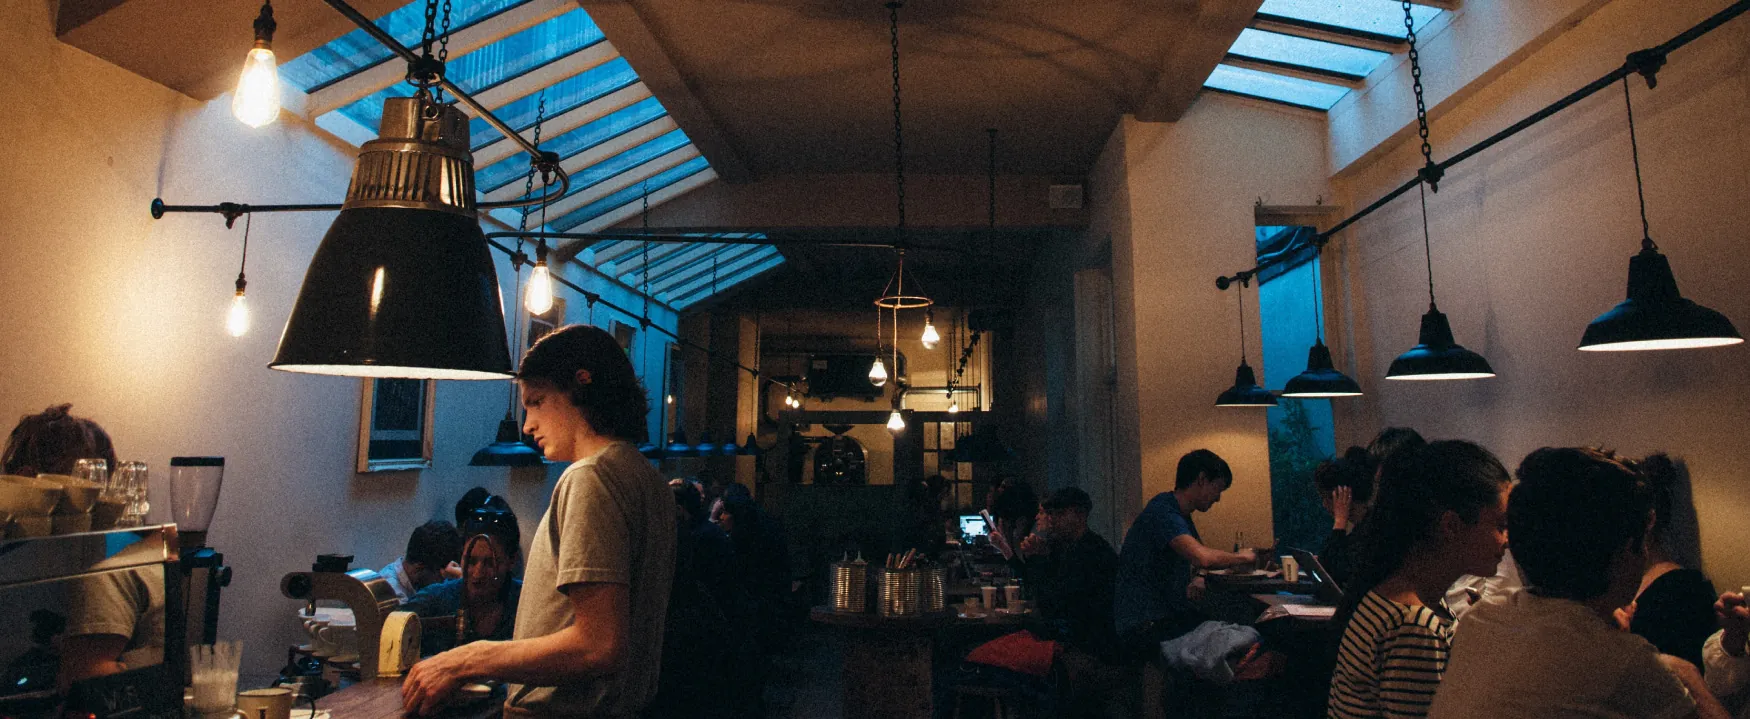 A dimly lit, crowded coffee shop is shown.  Patrons sit at tables, and a worker attends to a customer at the counter.